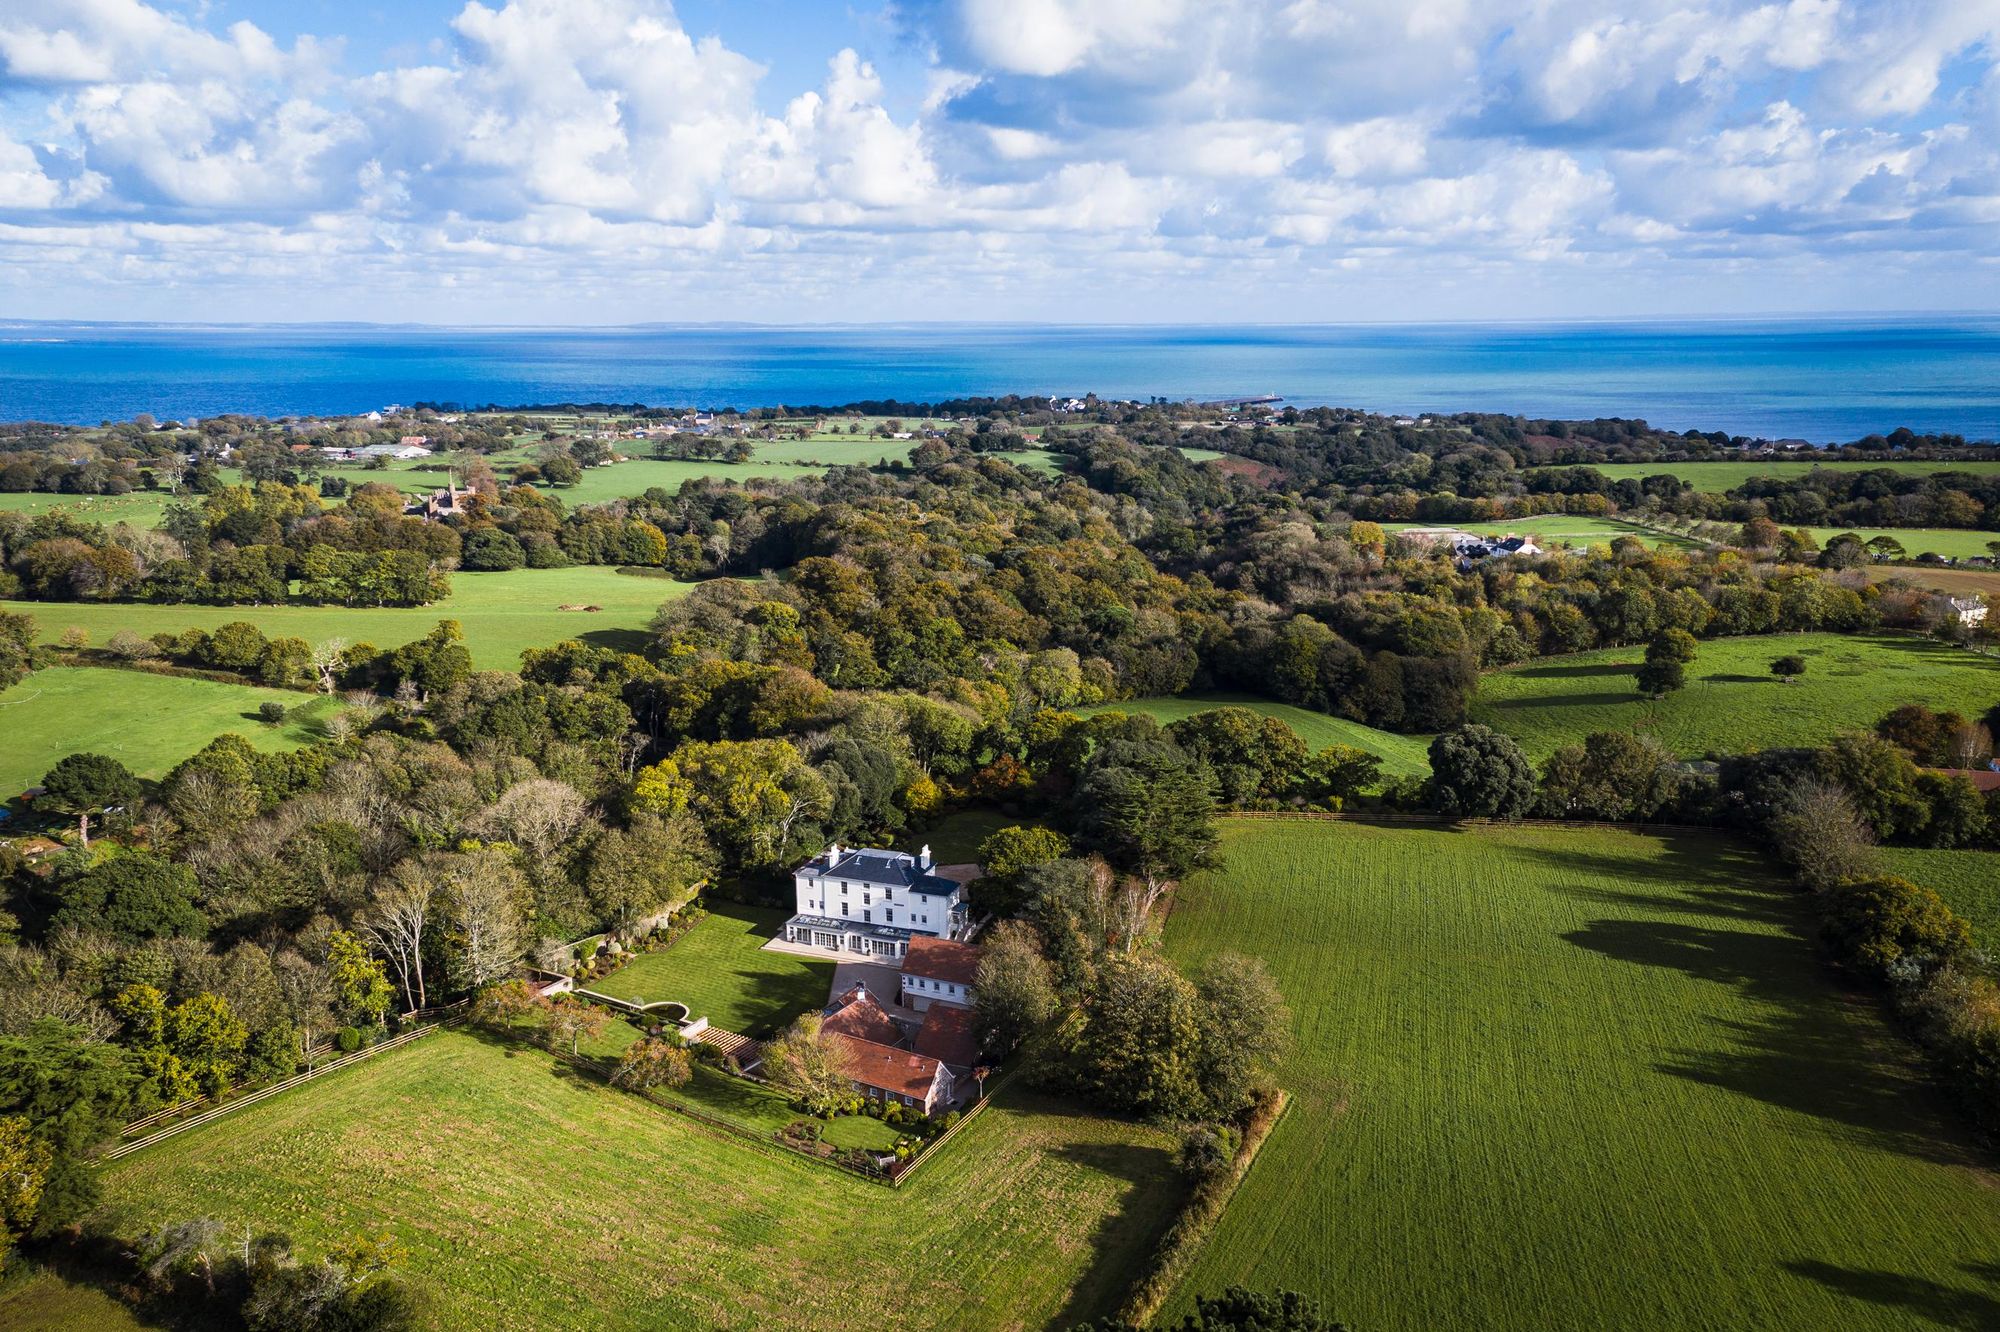 7 bed Property For Sale in St. Martin, Jersey